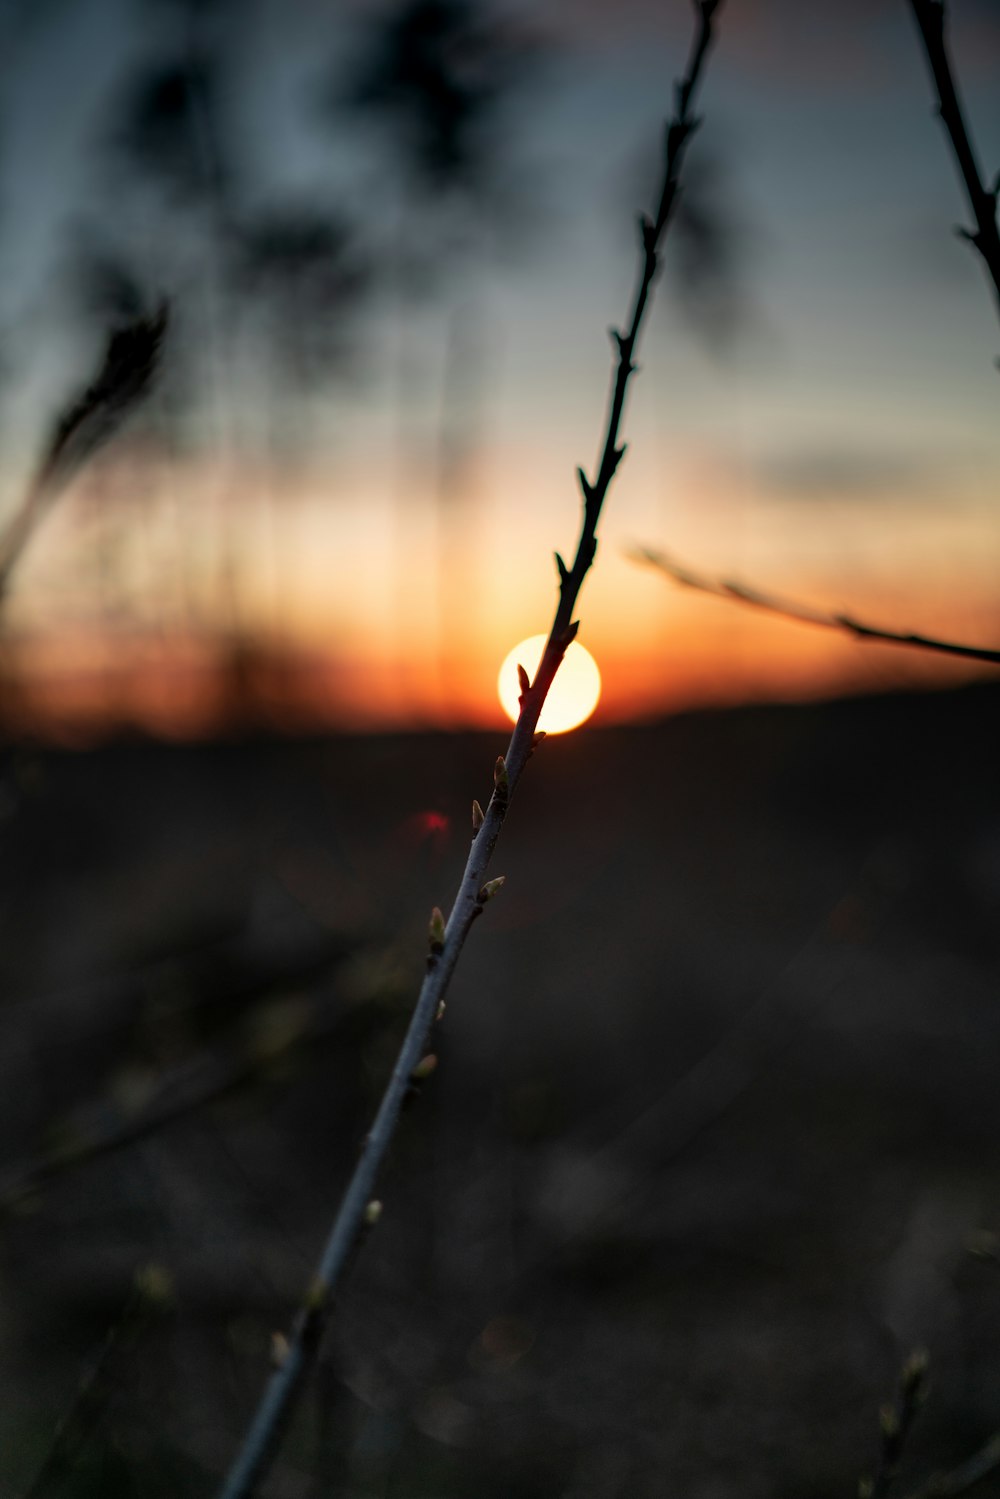 water dew on gray wire during sunset